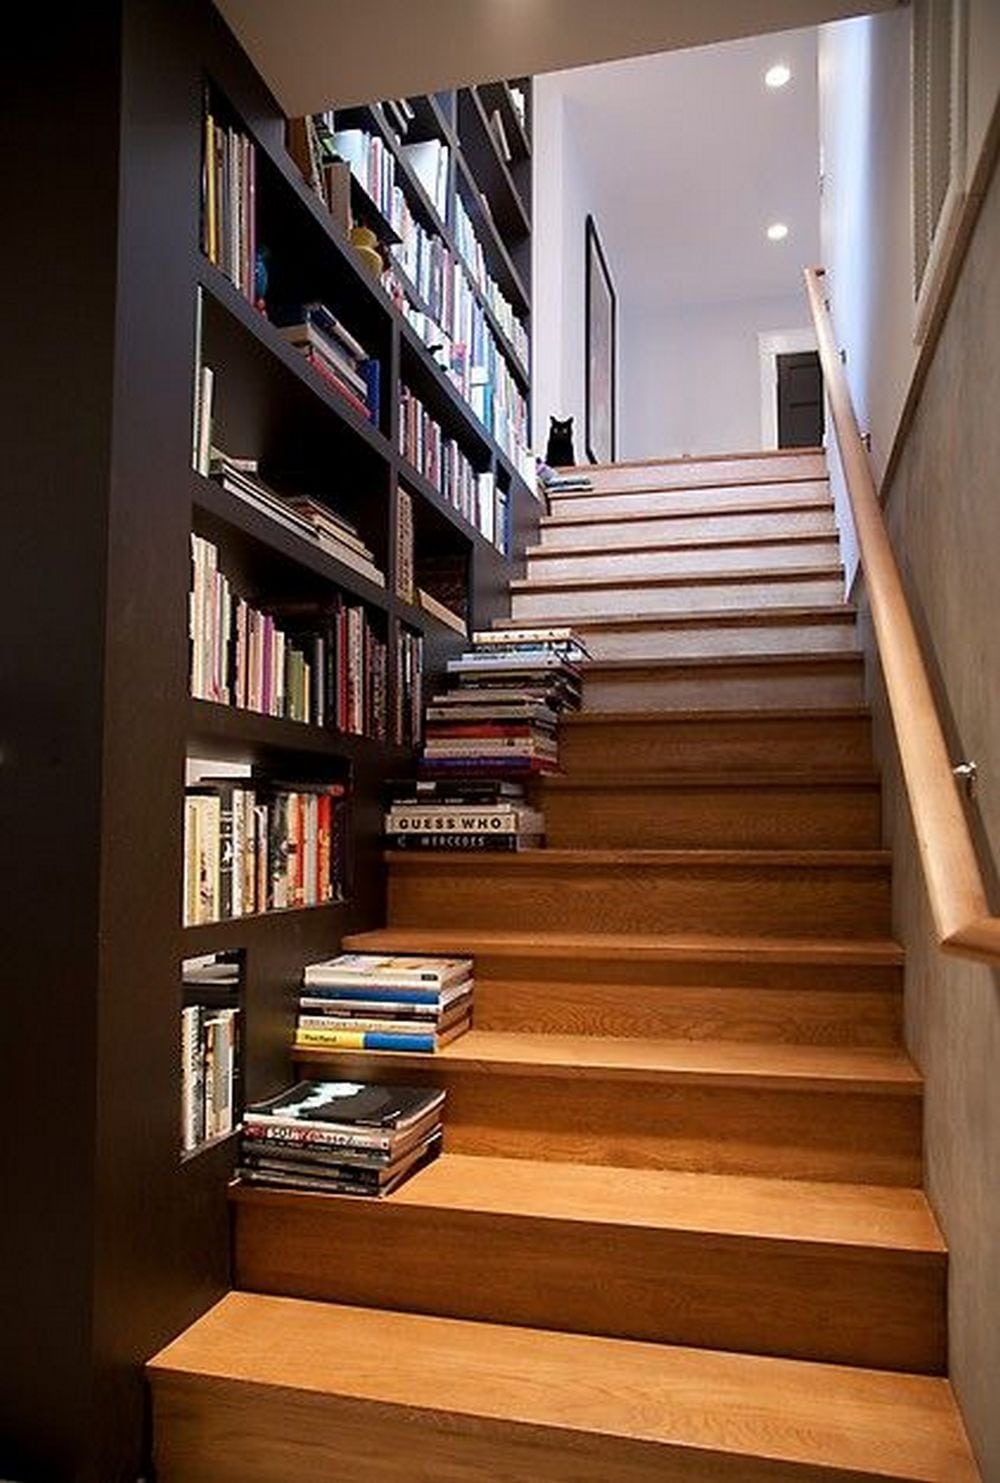 Minimalist Stair Bookcase with Simple Decor